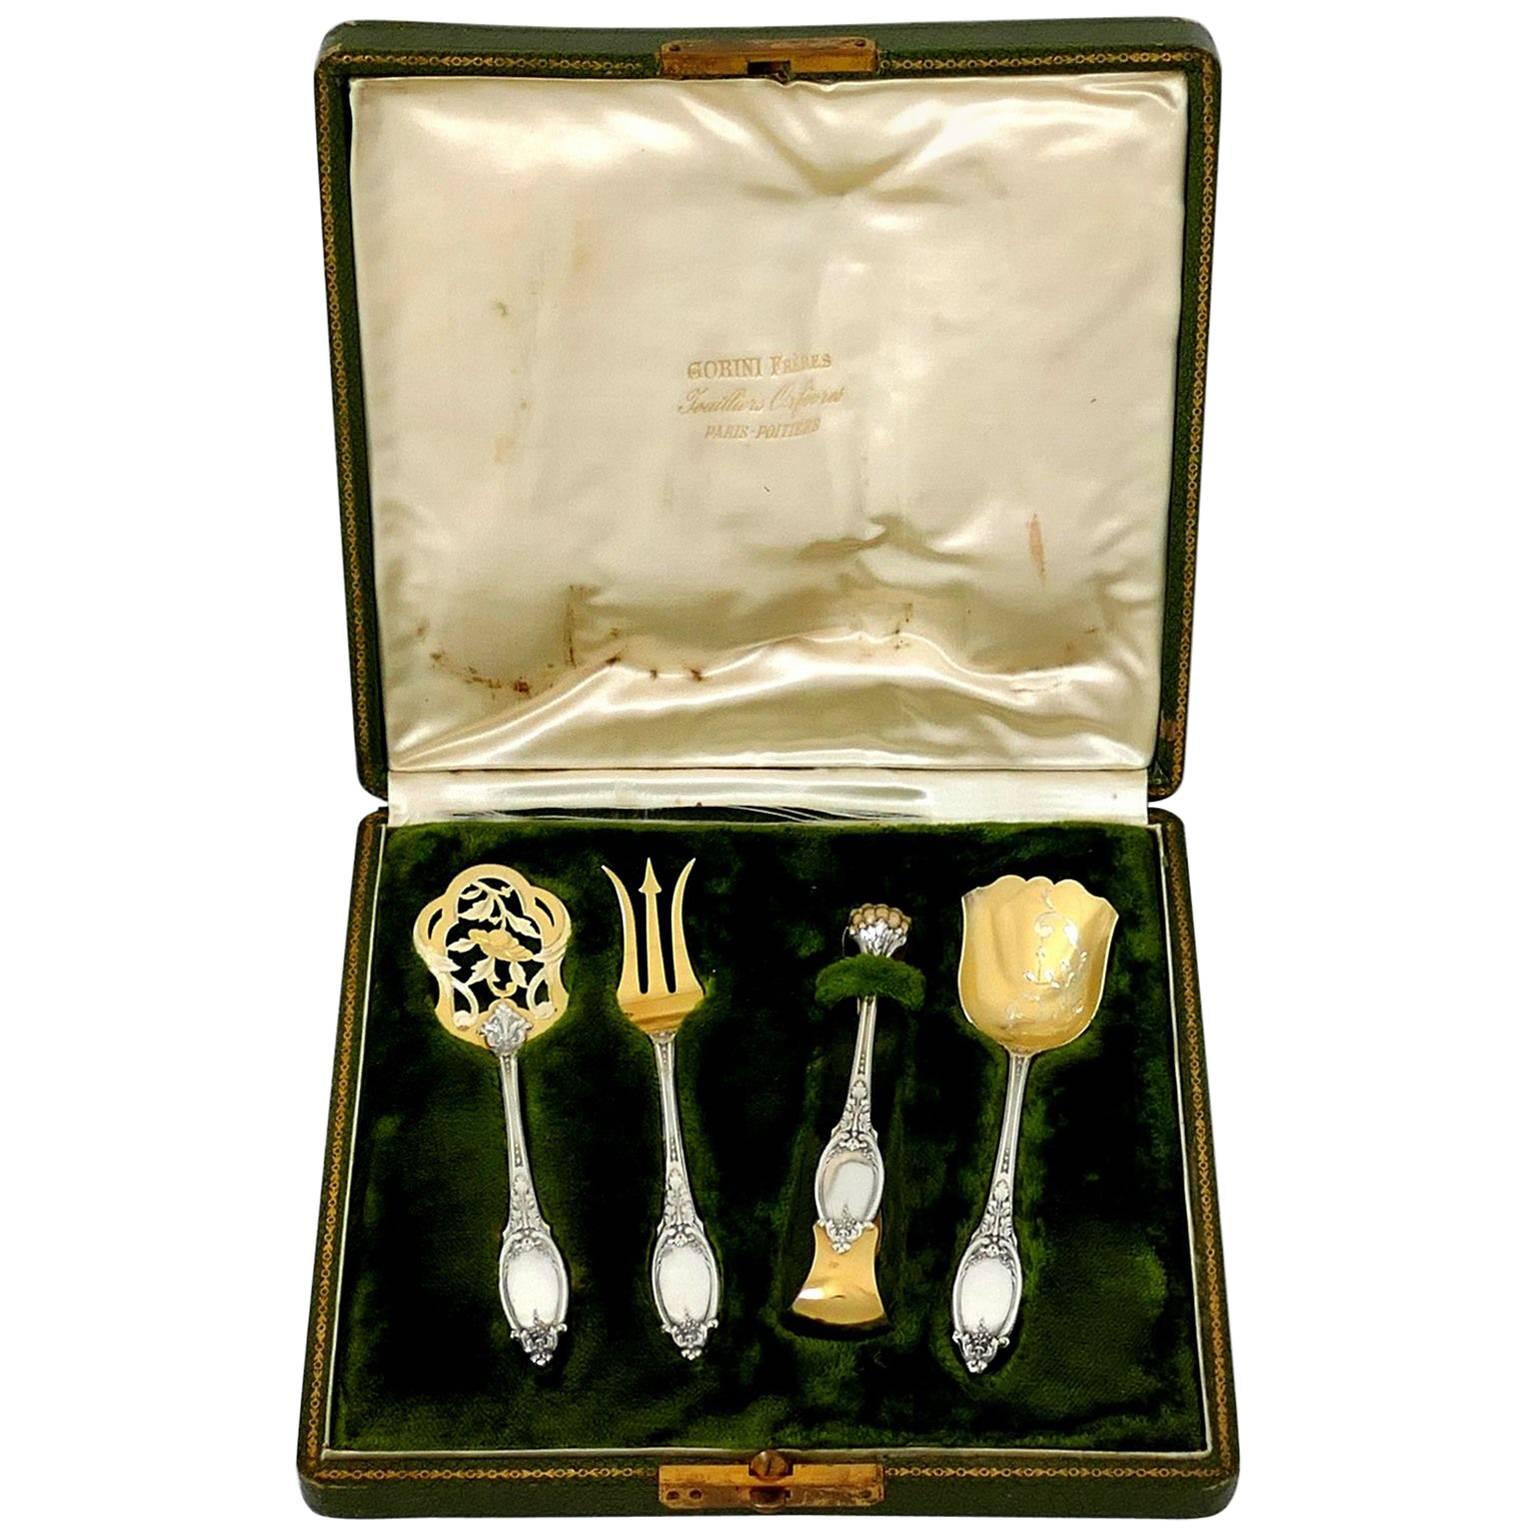 Maillard French All Sterling Silver 18-Karat Gold Dessert Set, Box, Neoclassical For Sale